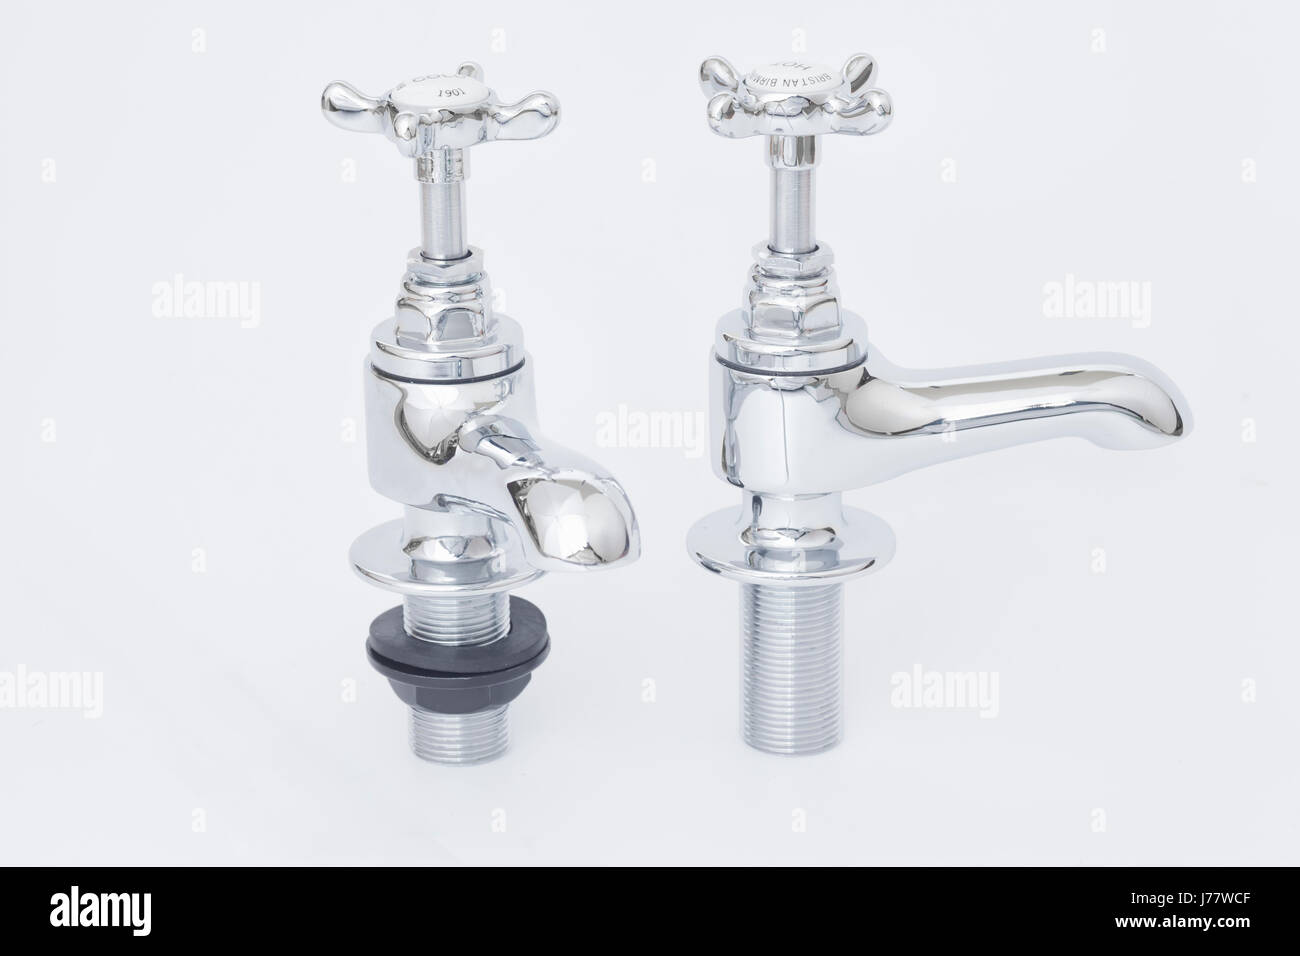 Traditional Hot and Cold Water tap loose elements. Stock Photo